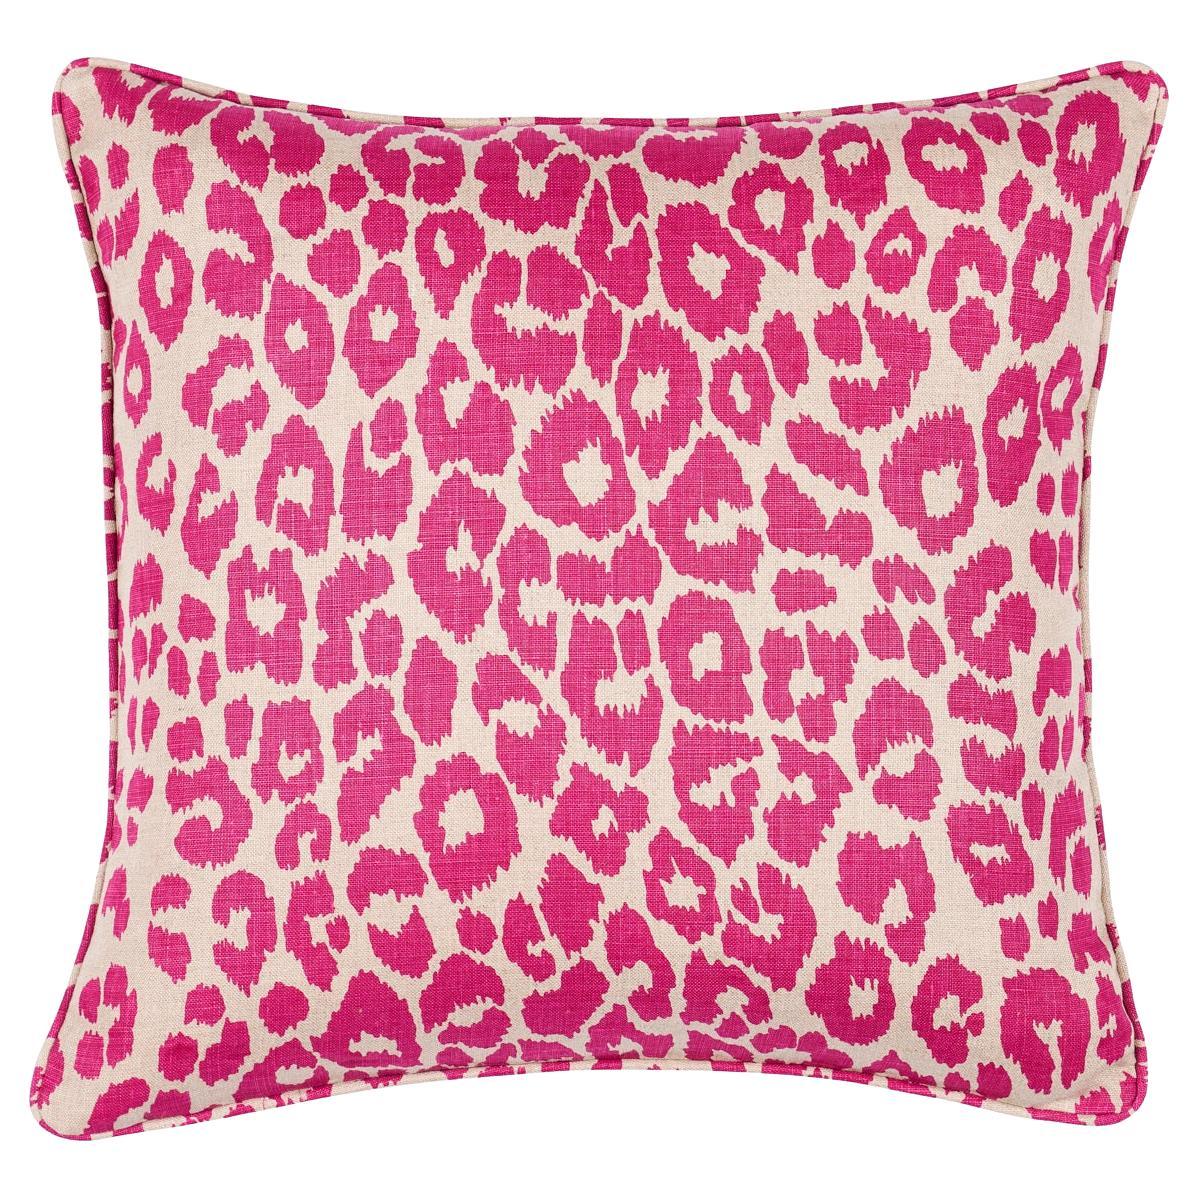 Schumacher Iconic Leopard 18" Pillow in Fuschia/Natural For Sale